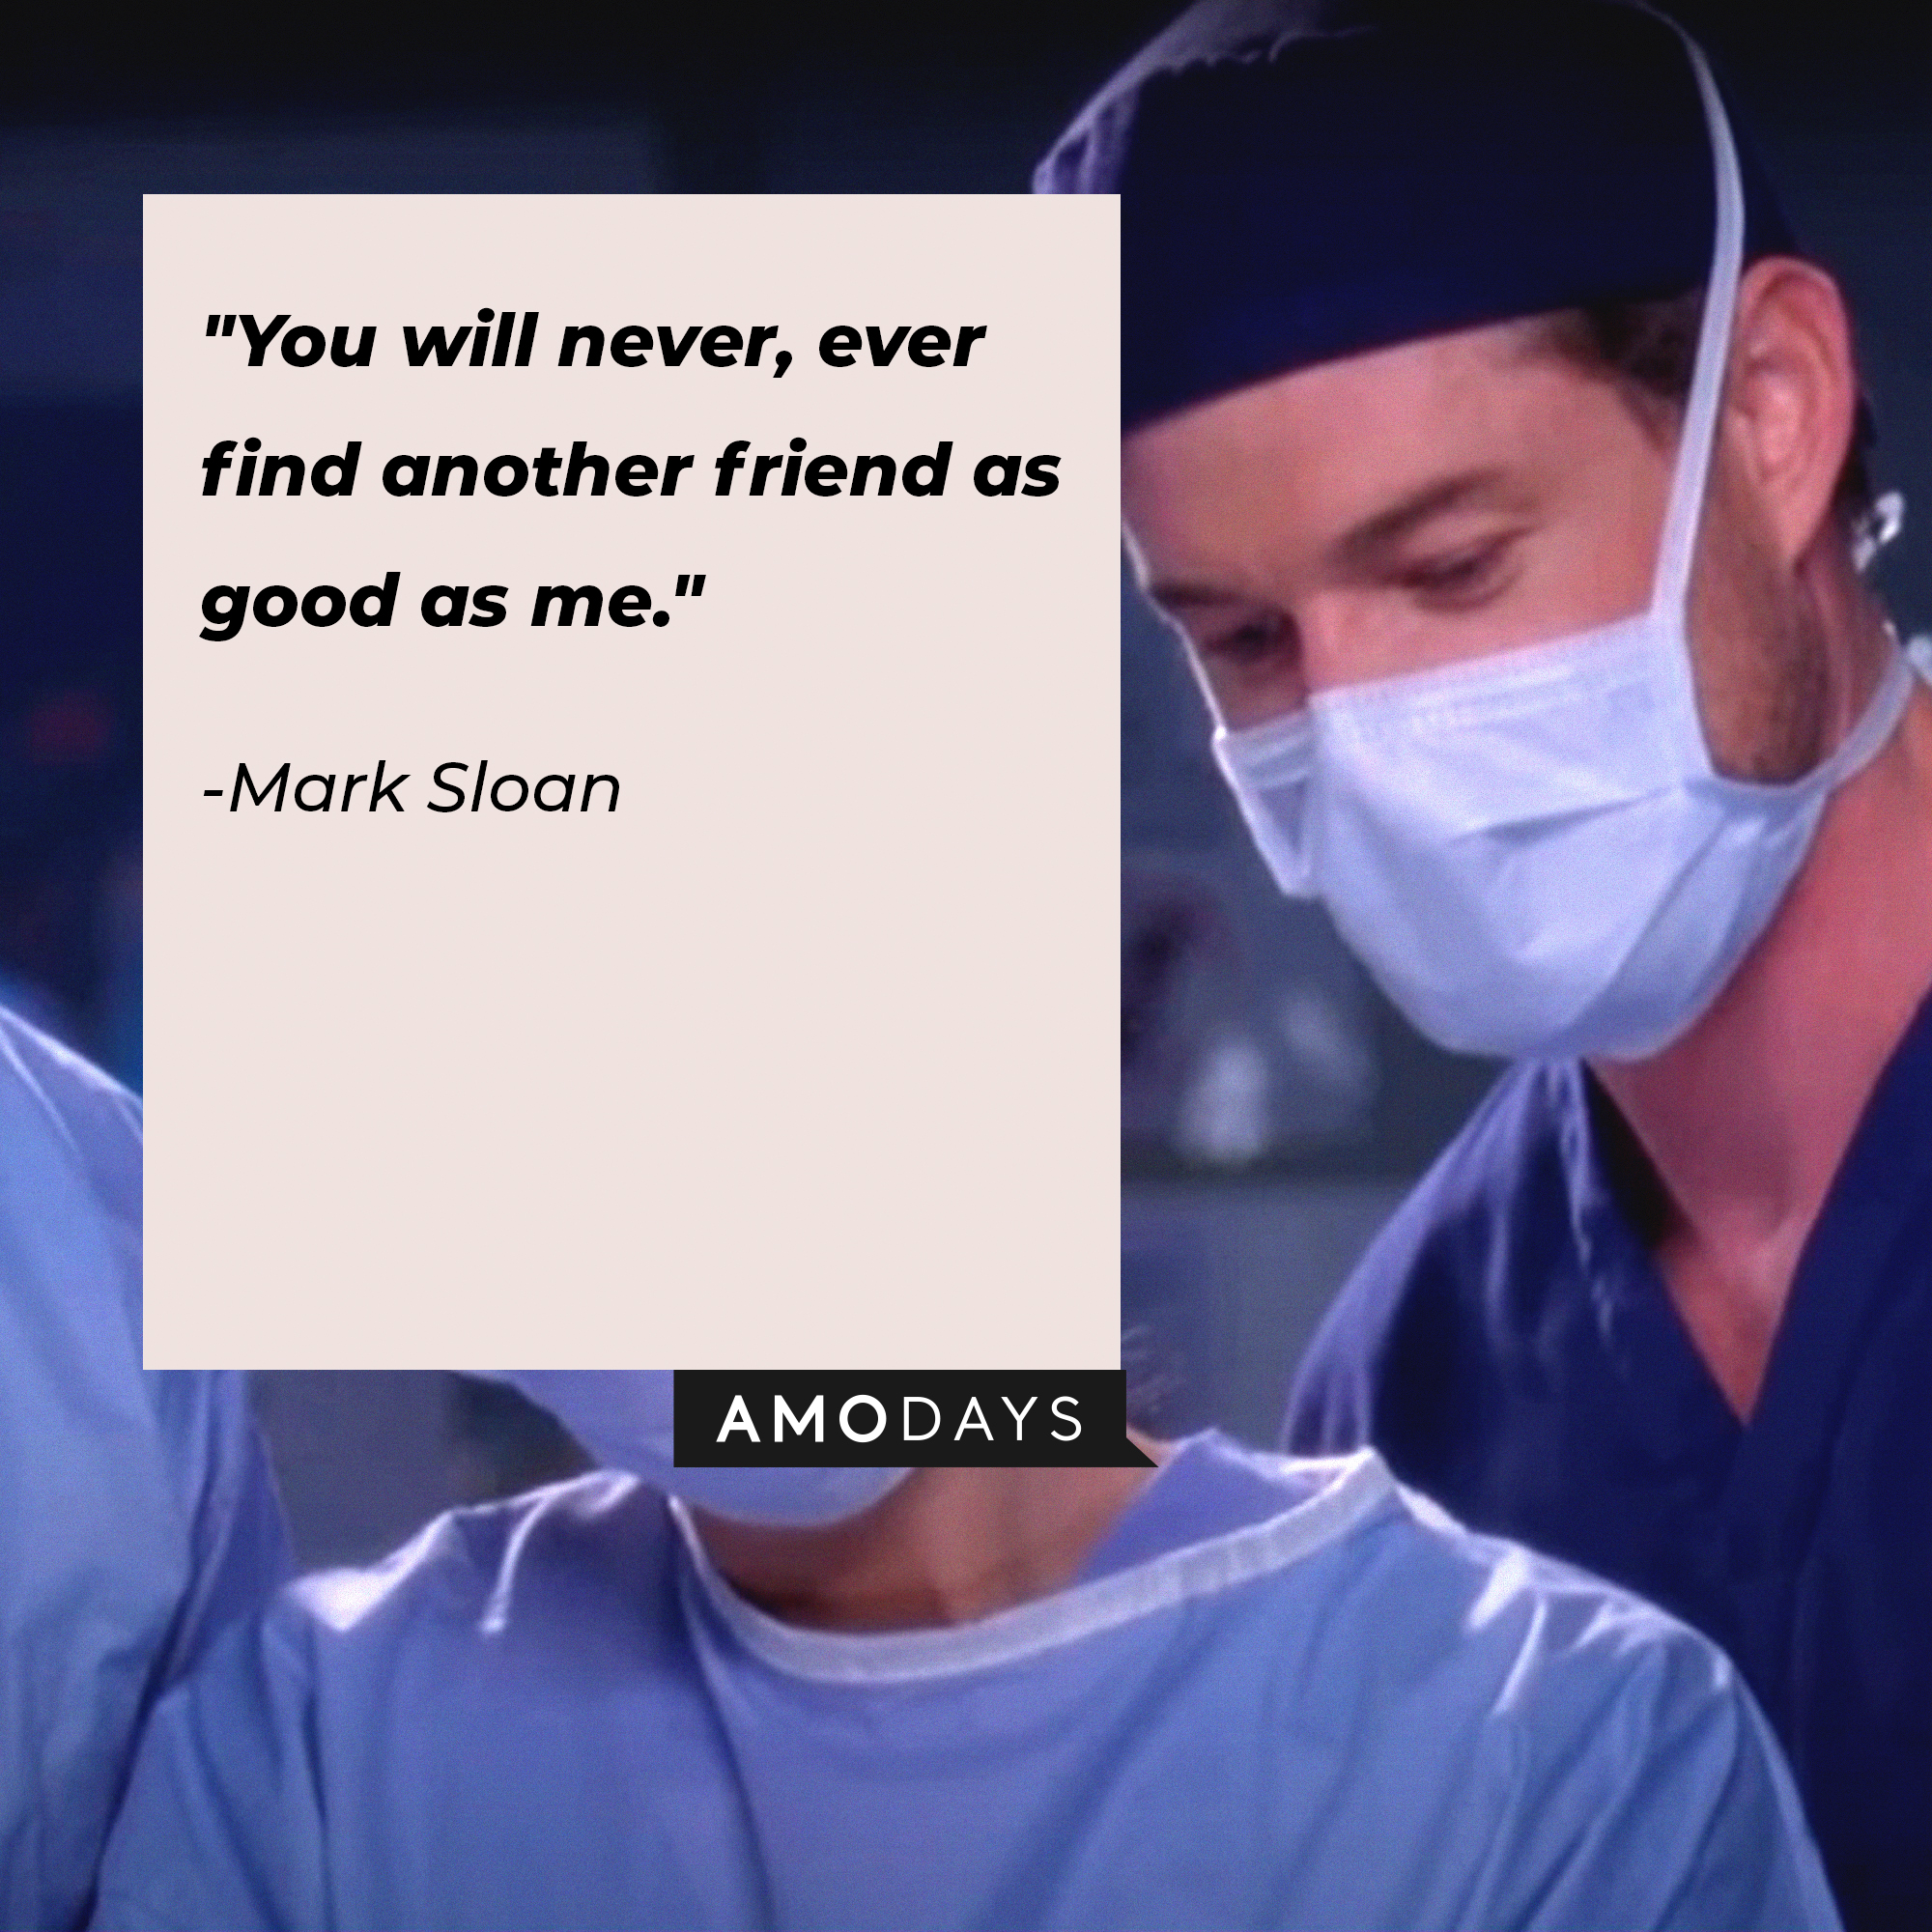 Mark Sloan's quote: "You will never, ever find another friend as good as me." | Image: AmoDays